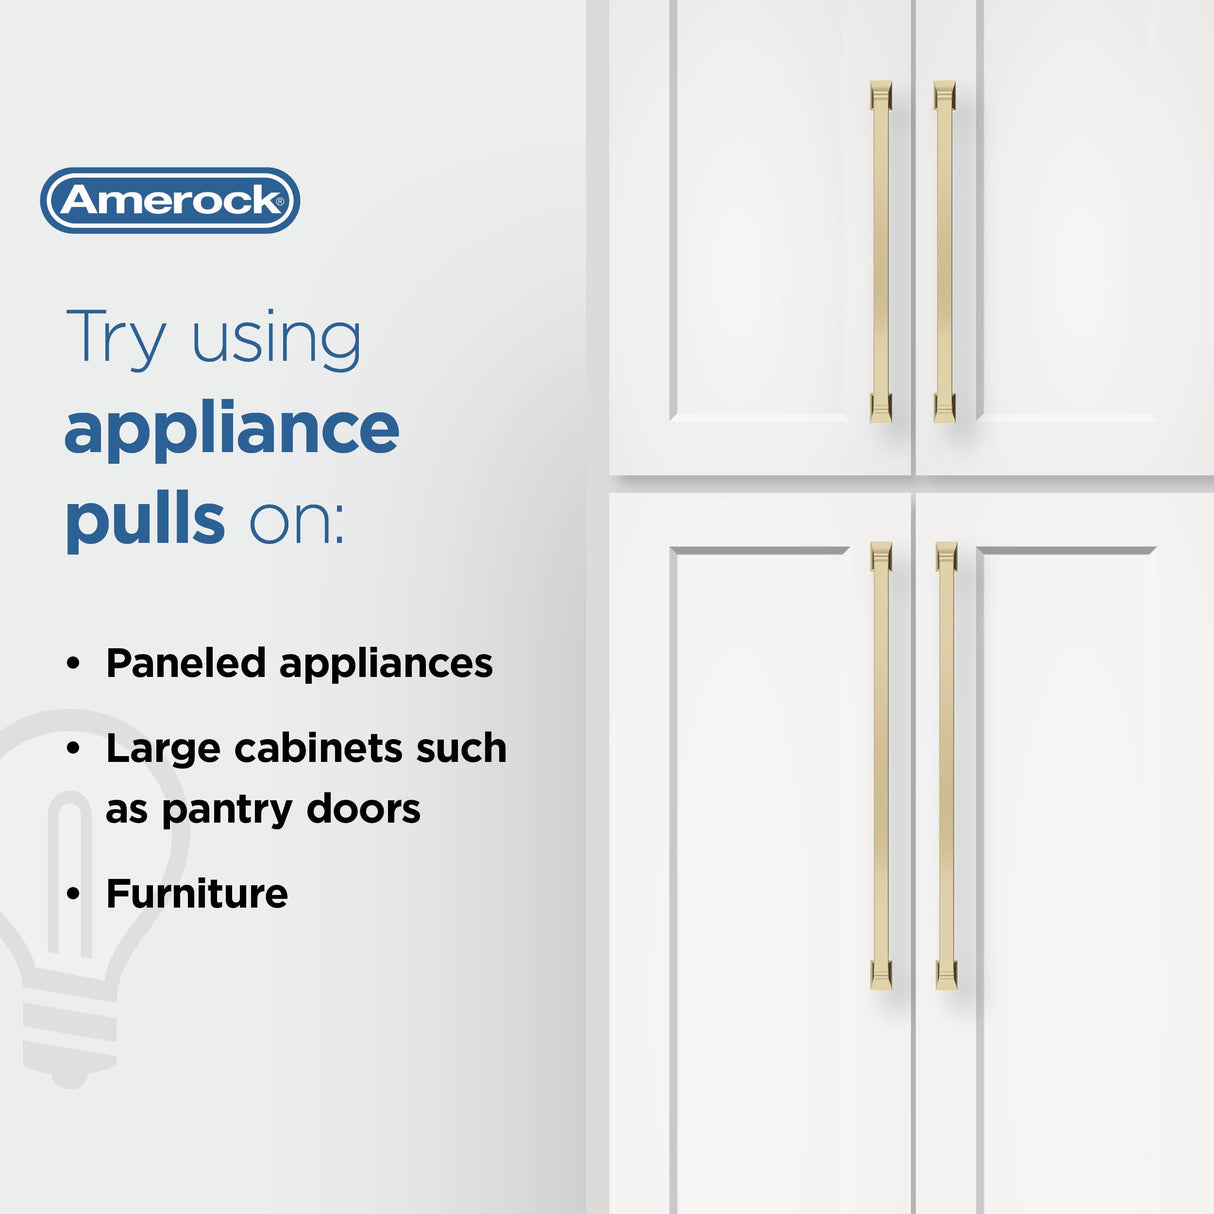 Amerock Appliance Pull Golden Champagne 18 inch (457 mm) Center to Center Bar Pulls 1 Pack Drawer Pull Drawer Handle Cabinet Hardware